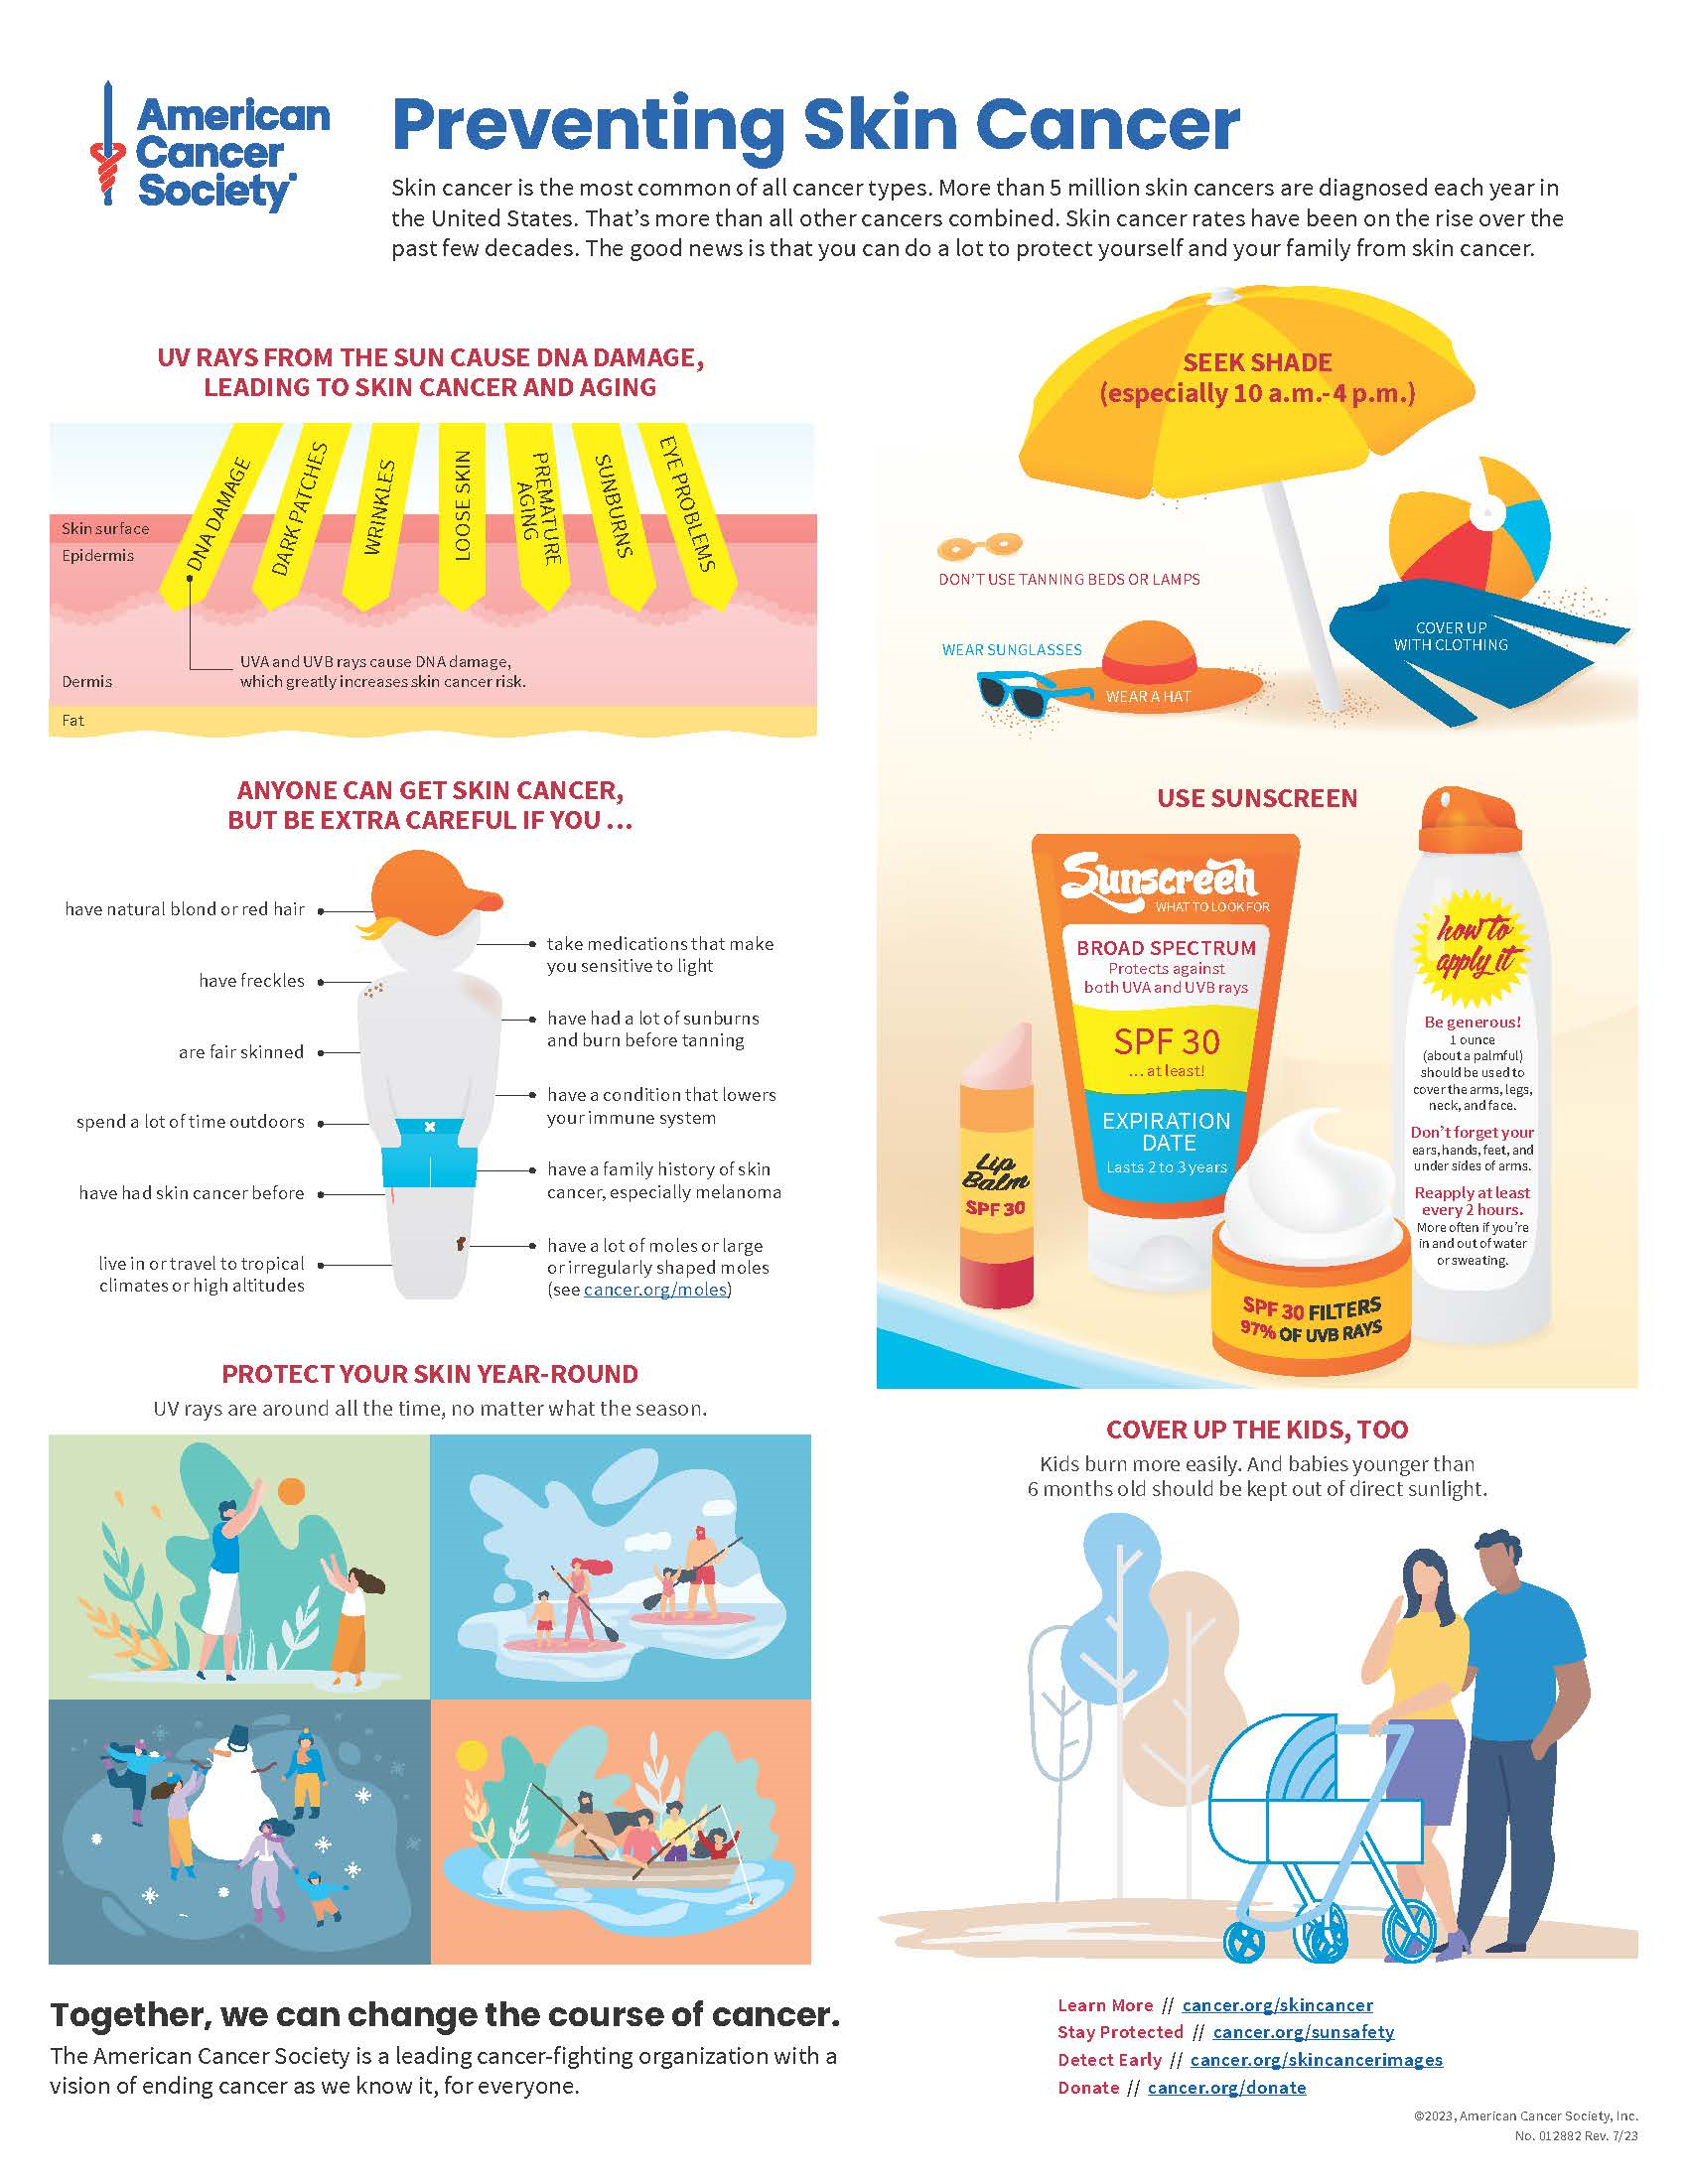 Infographic illustrating ways to prevent skin cancer.